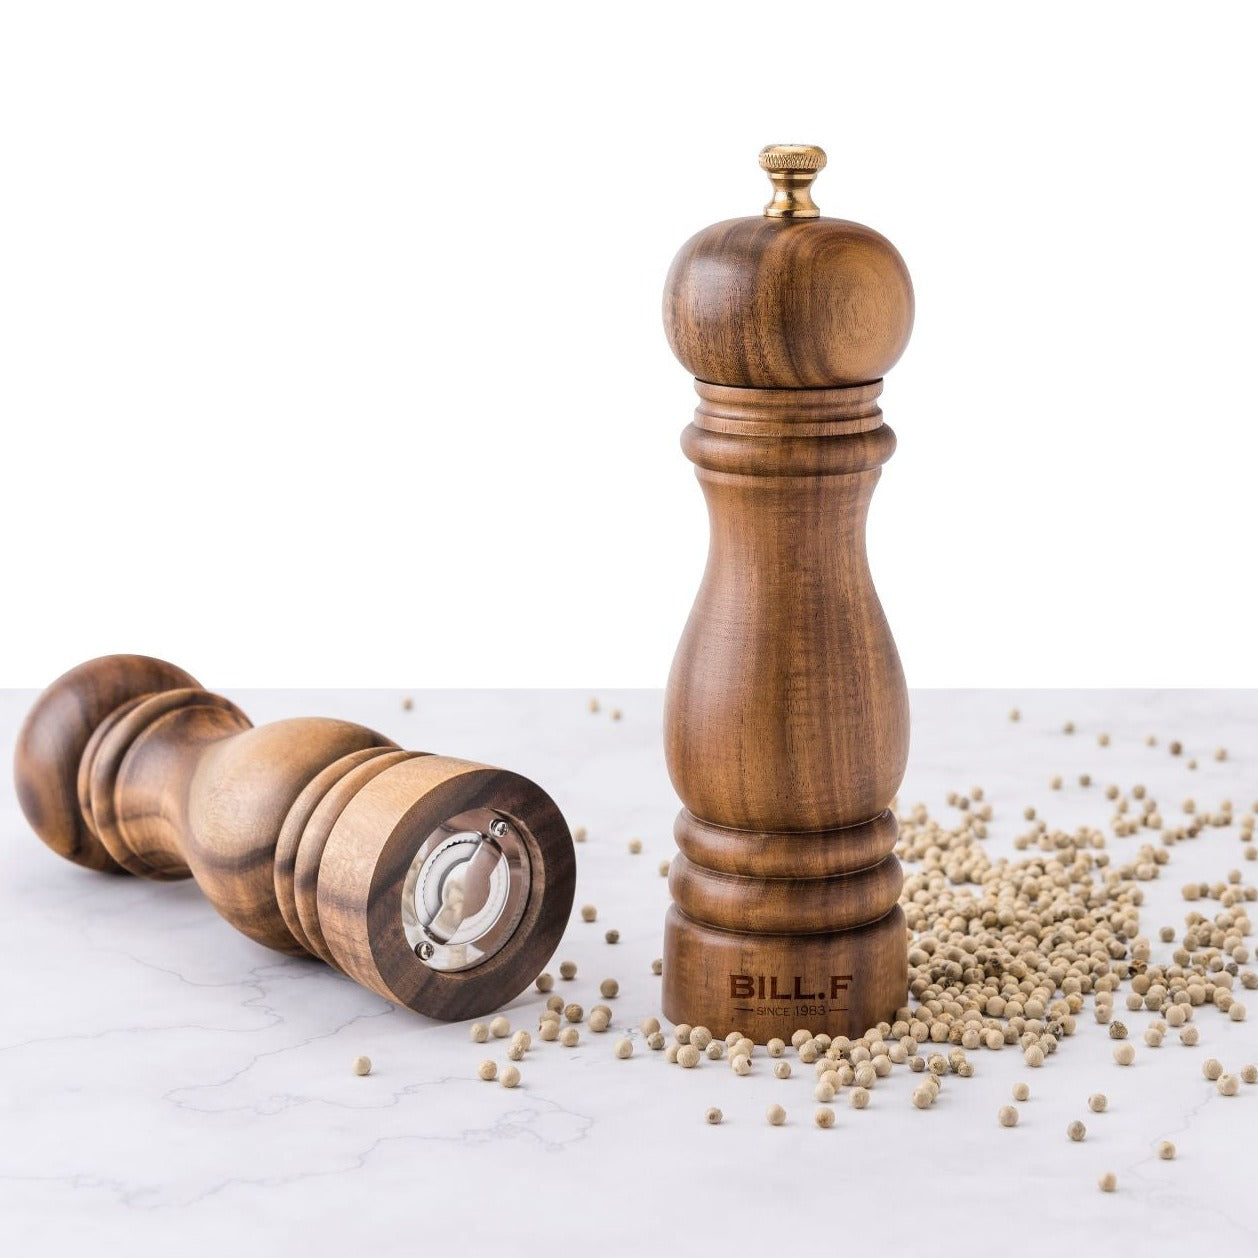 Buy Salter Stainless Steel Electronic Salt & Pepper Mill Set at Barbeques  Galore.